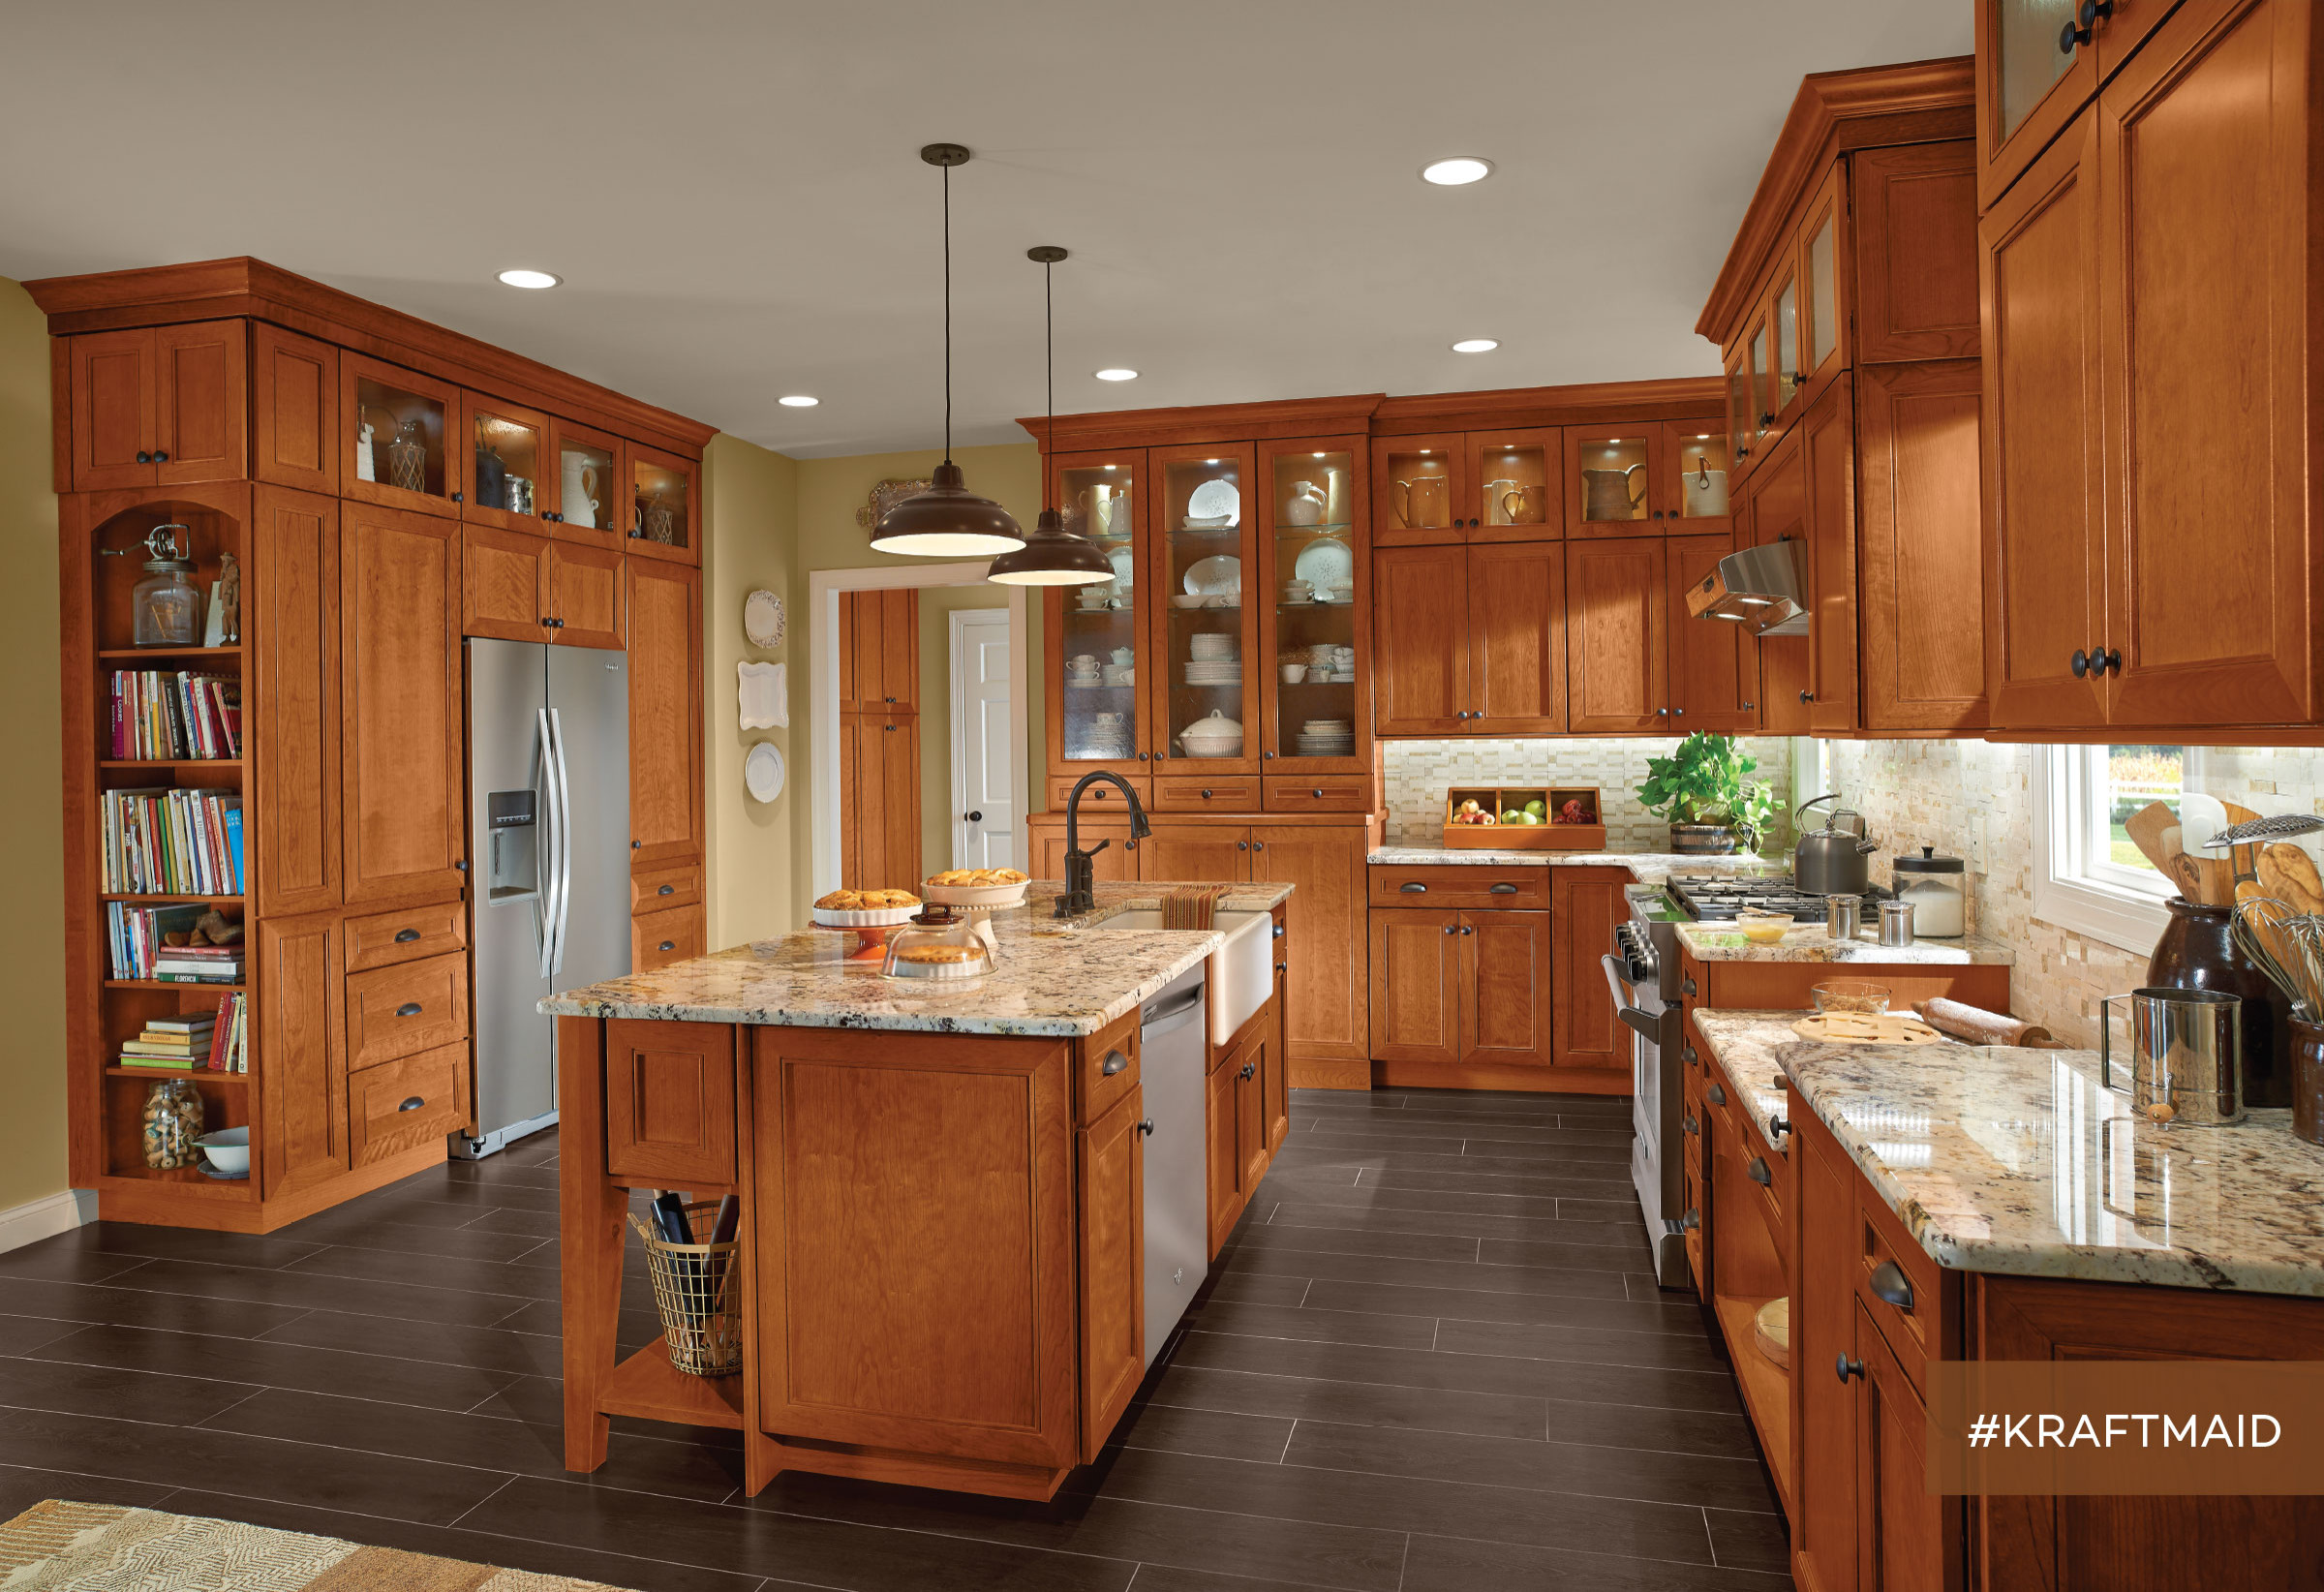 Kraftmaid Cherry Kitchen Cabinets In, How Are Kraftmaid Cabinets Made